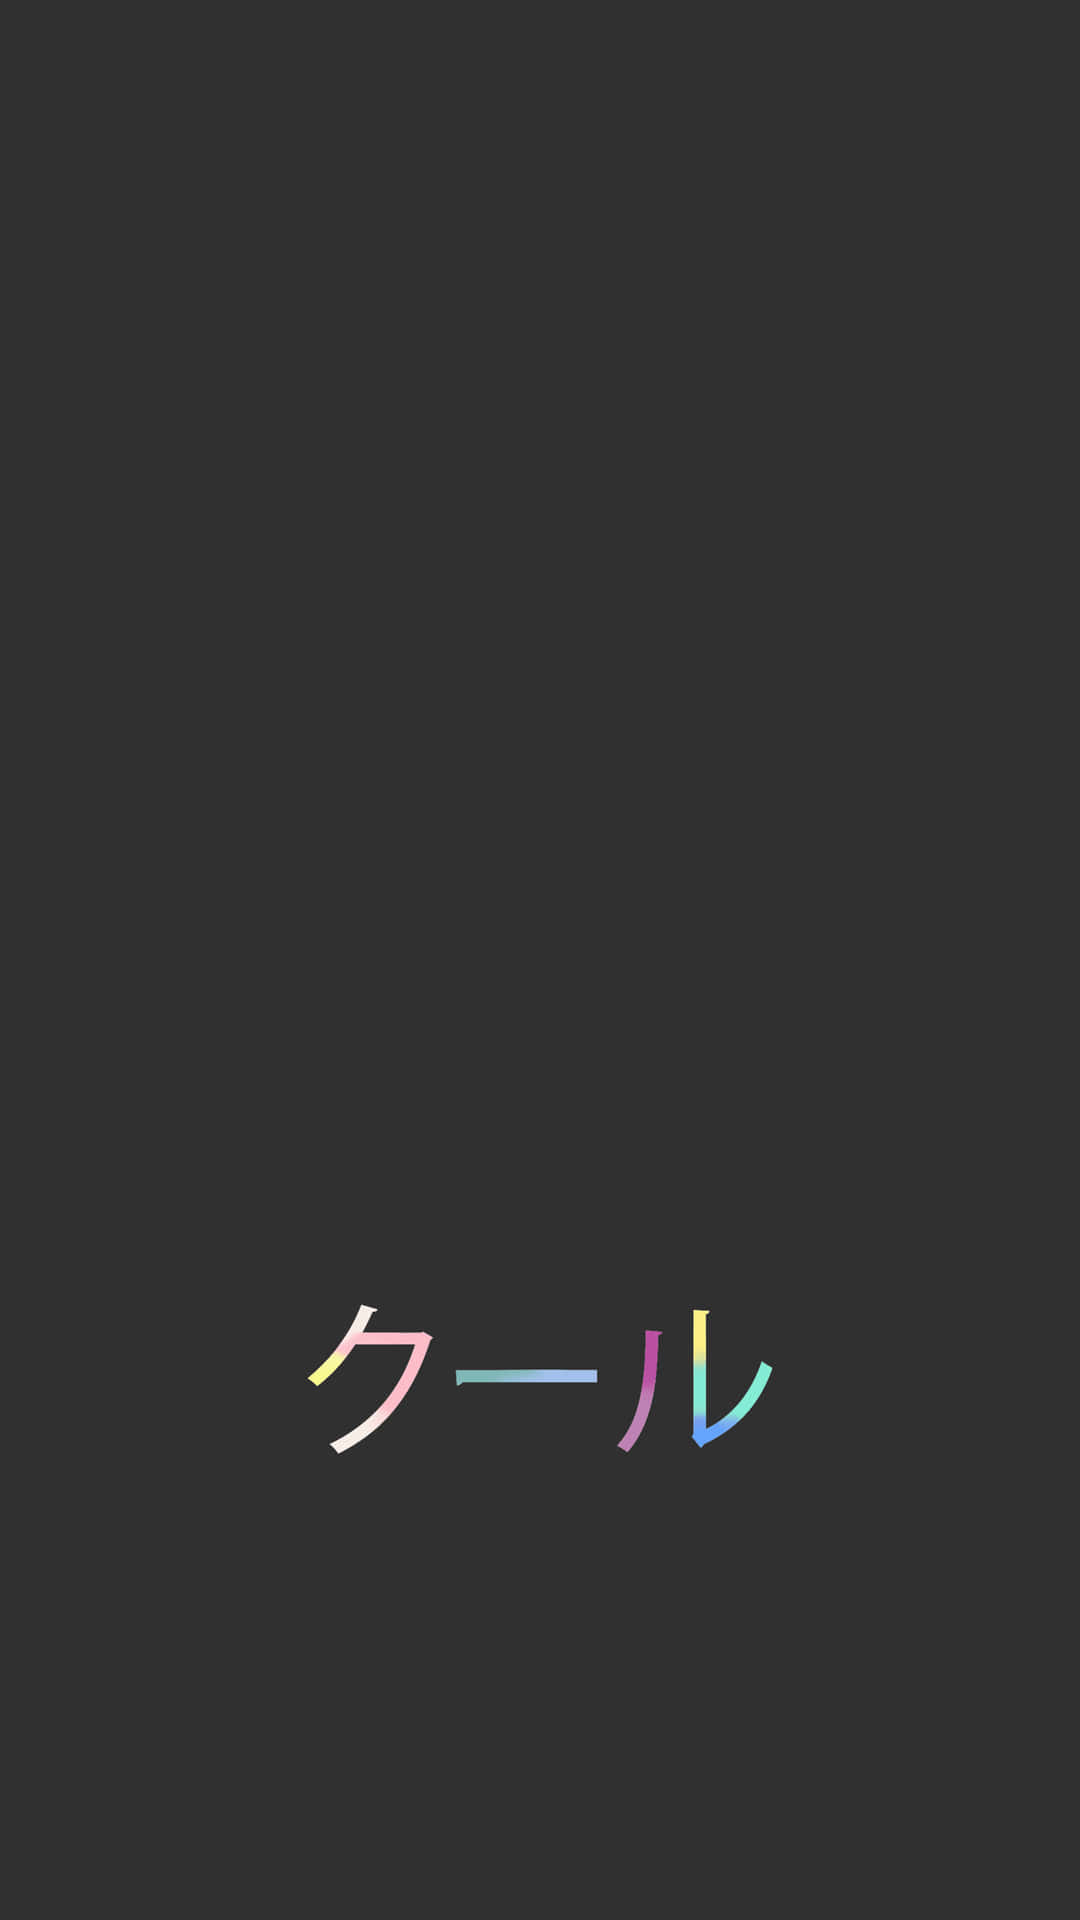 Colorful Text Japanese Aesthetic Black Wallpaper